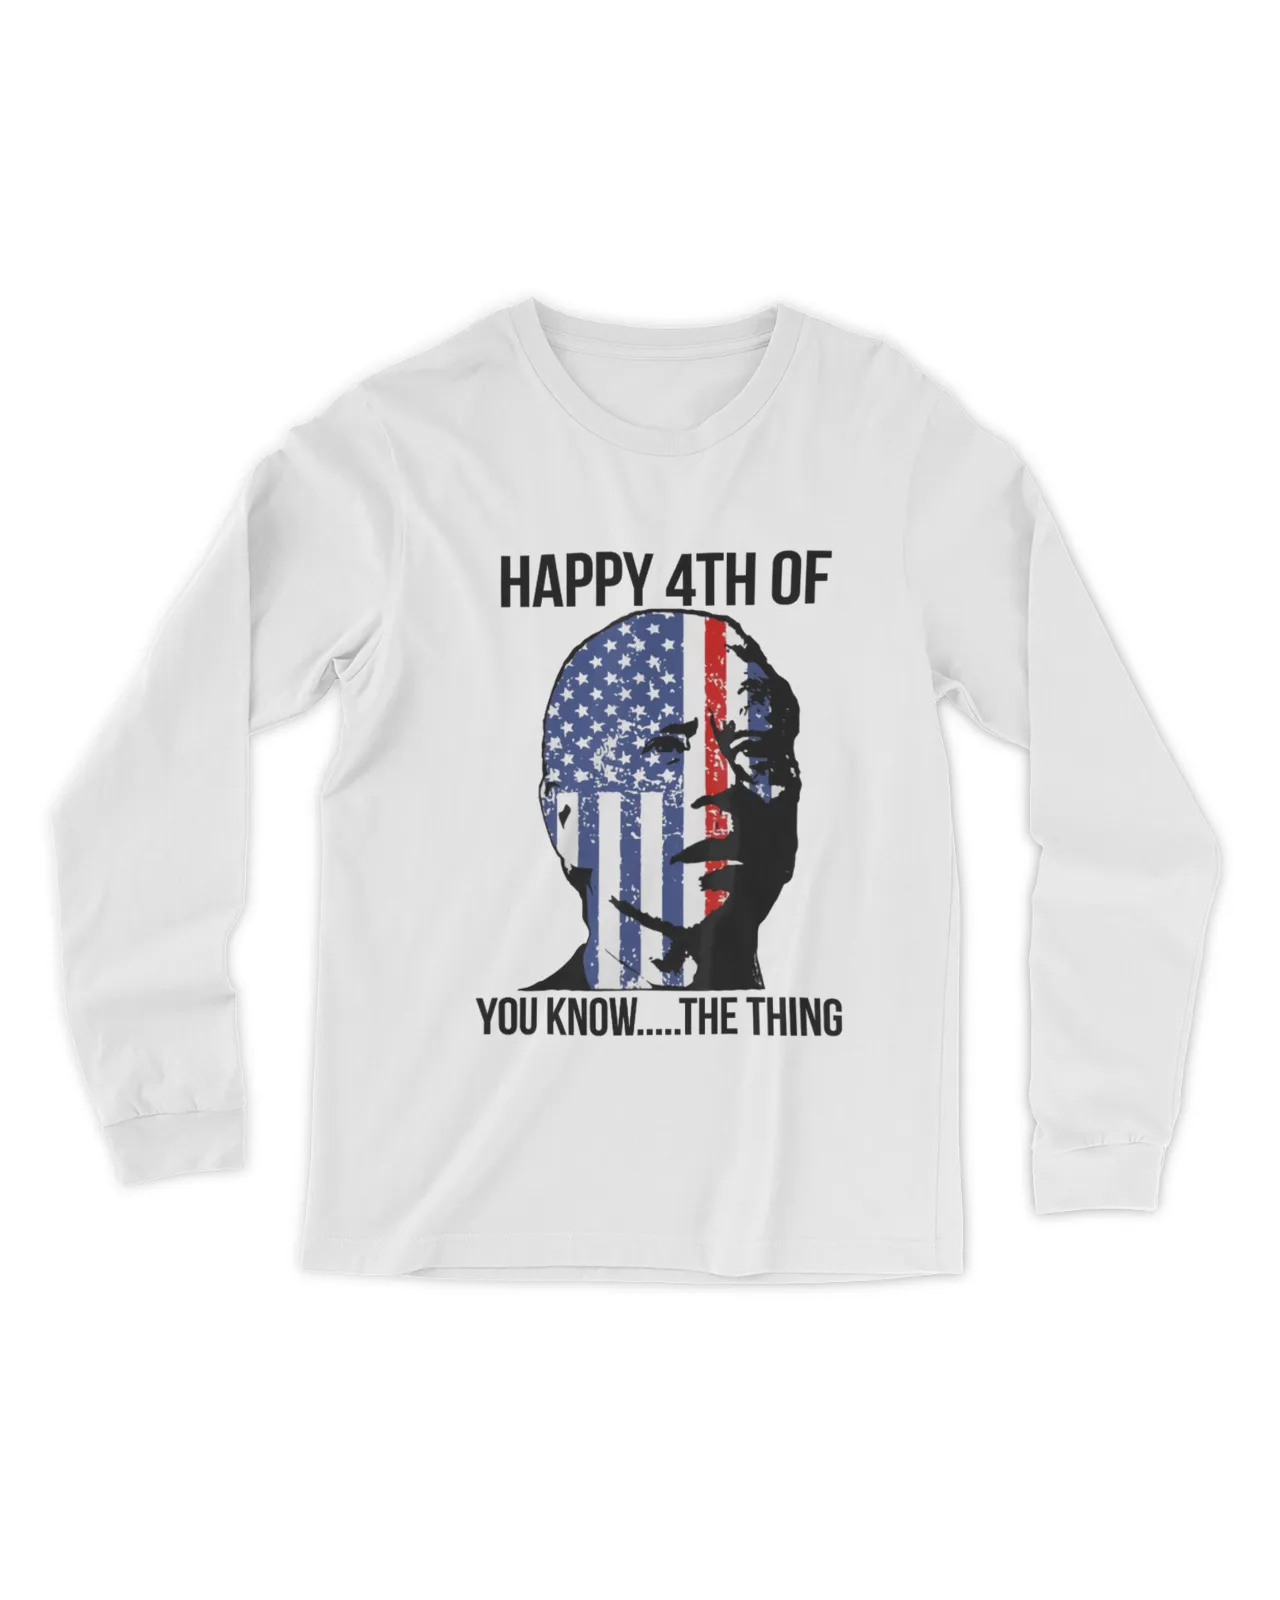 Joe Biden confused happy 4th of you know the thing shirt